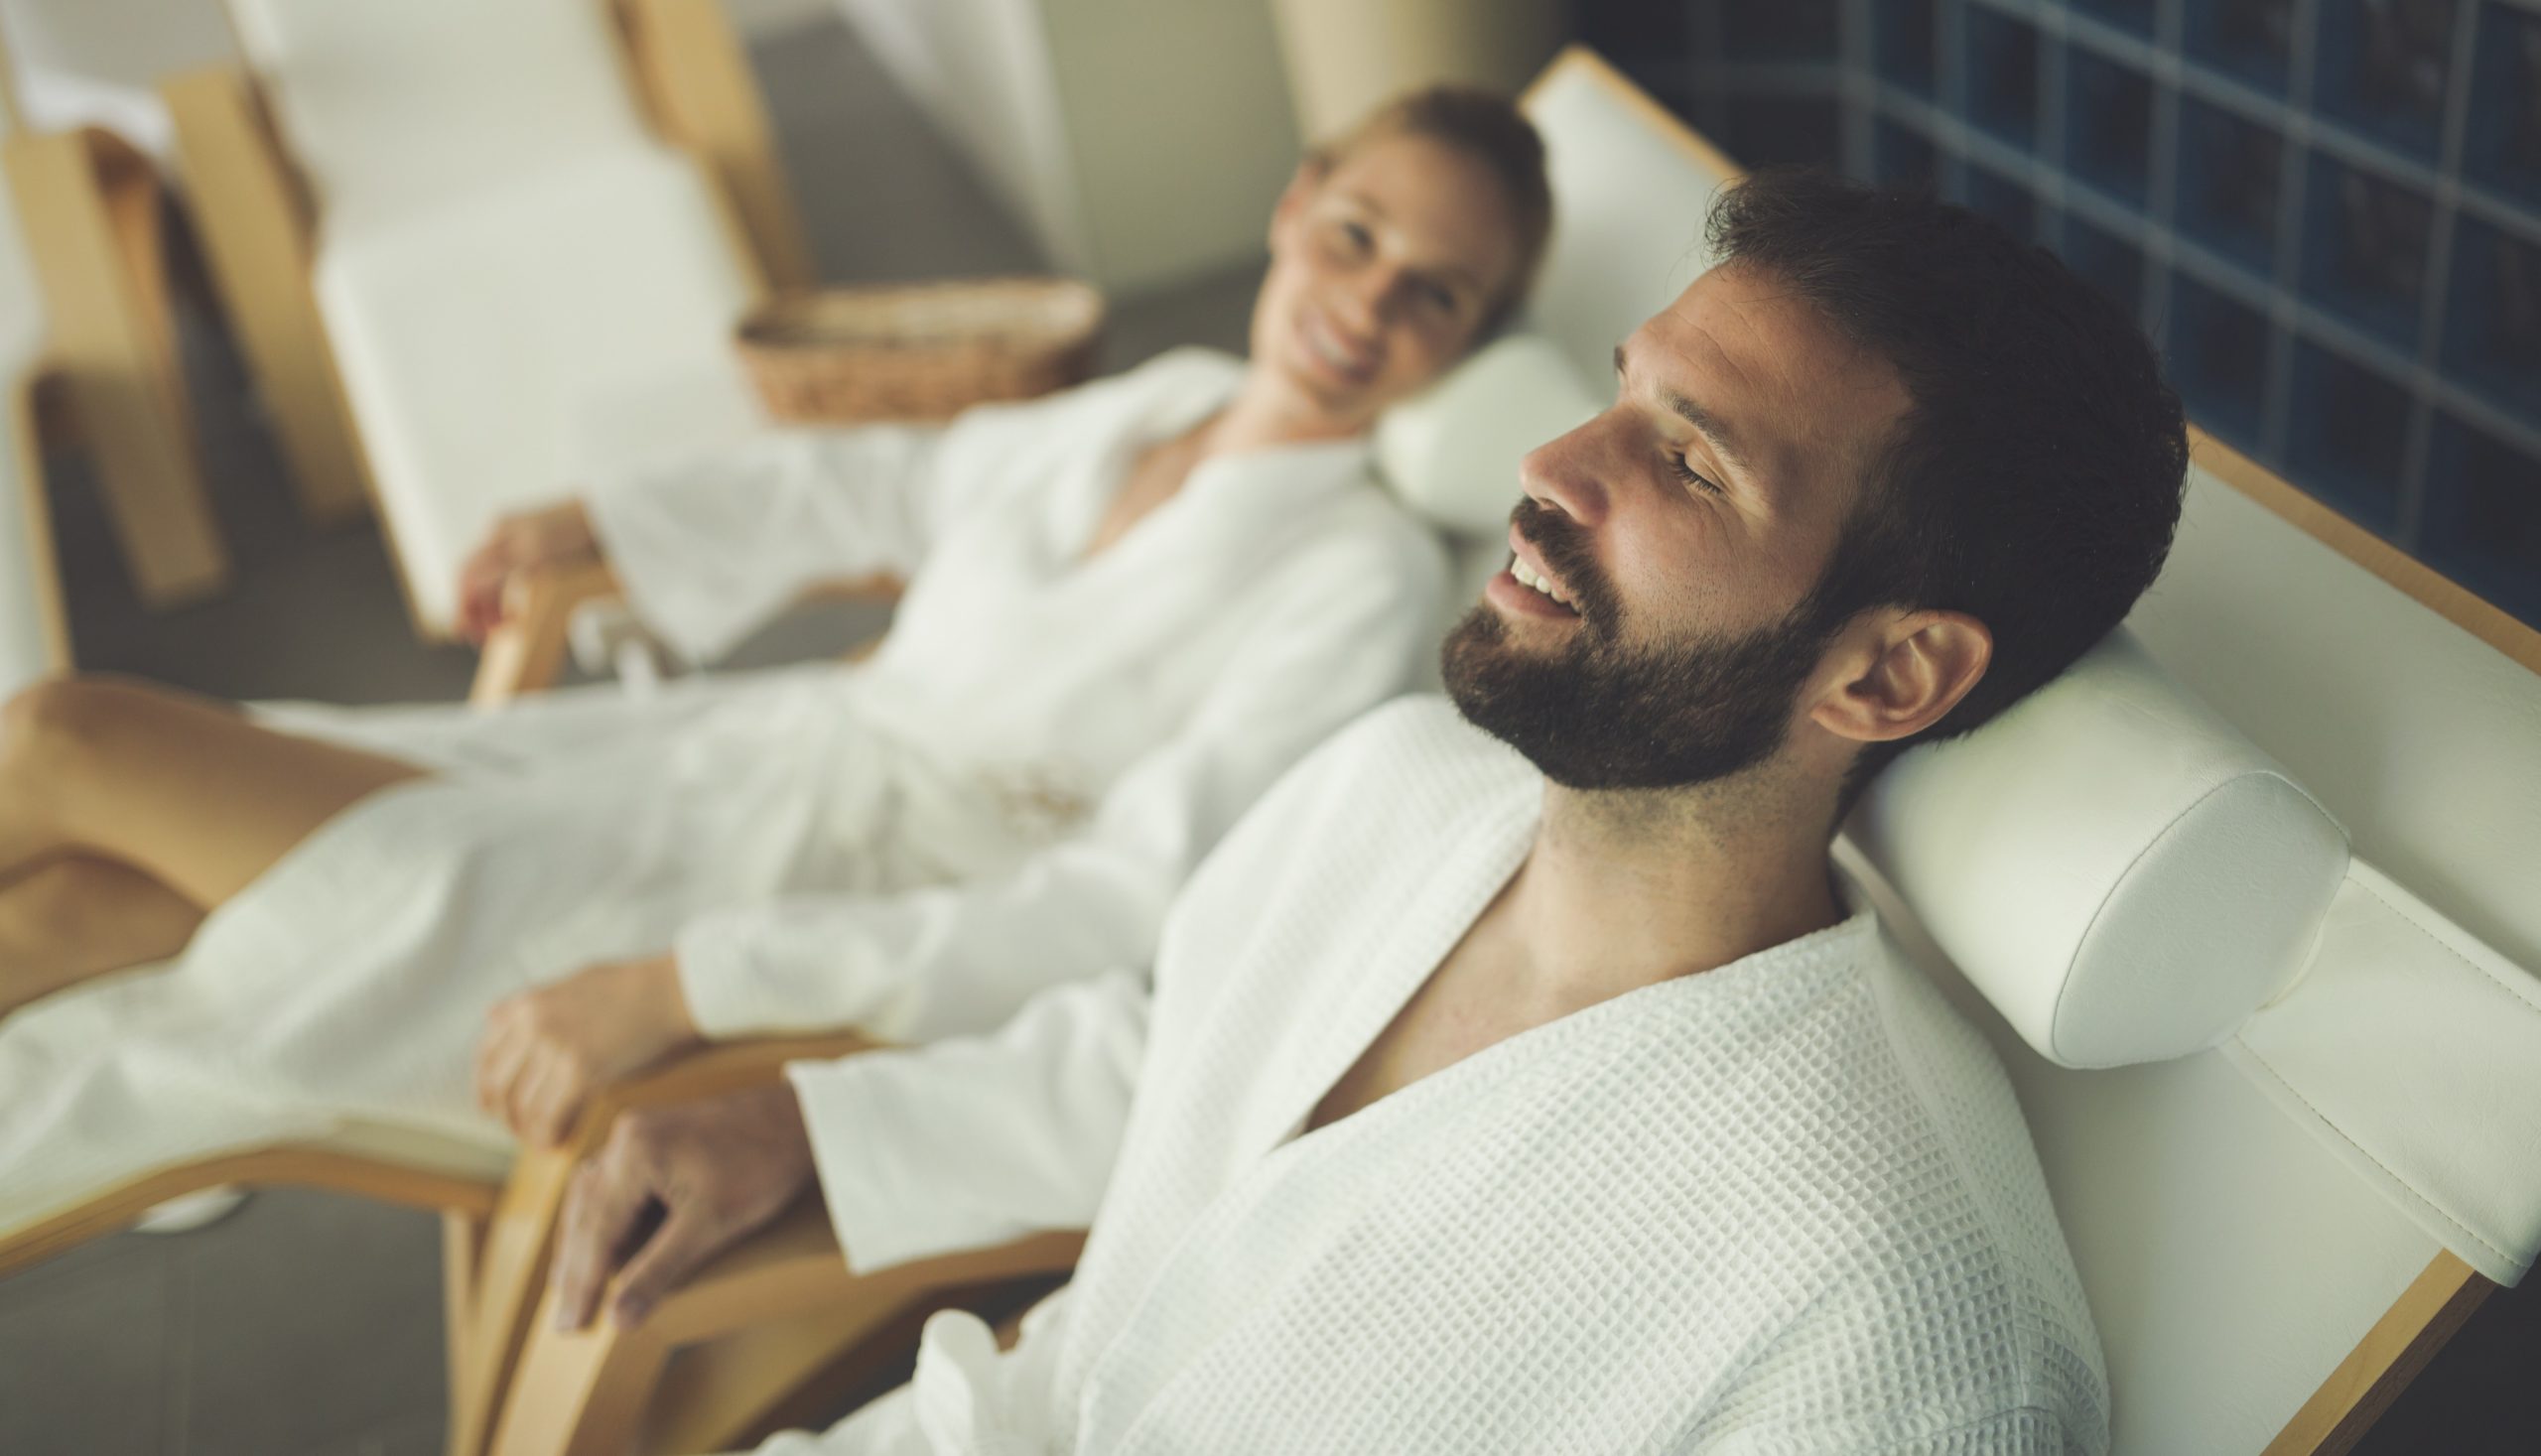 “Relaxation and Romance: Rejuvenating Your Relationship with Spa Days”